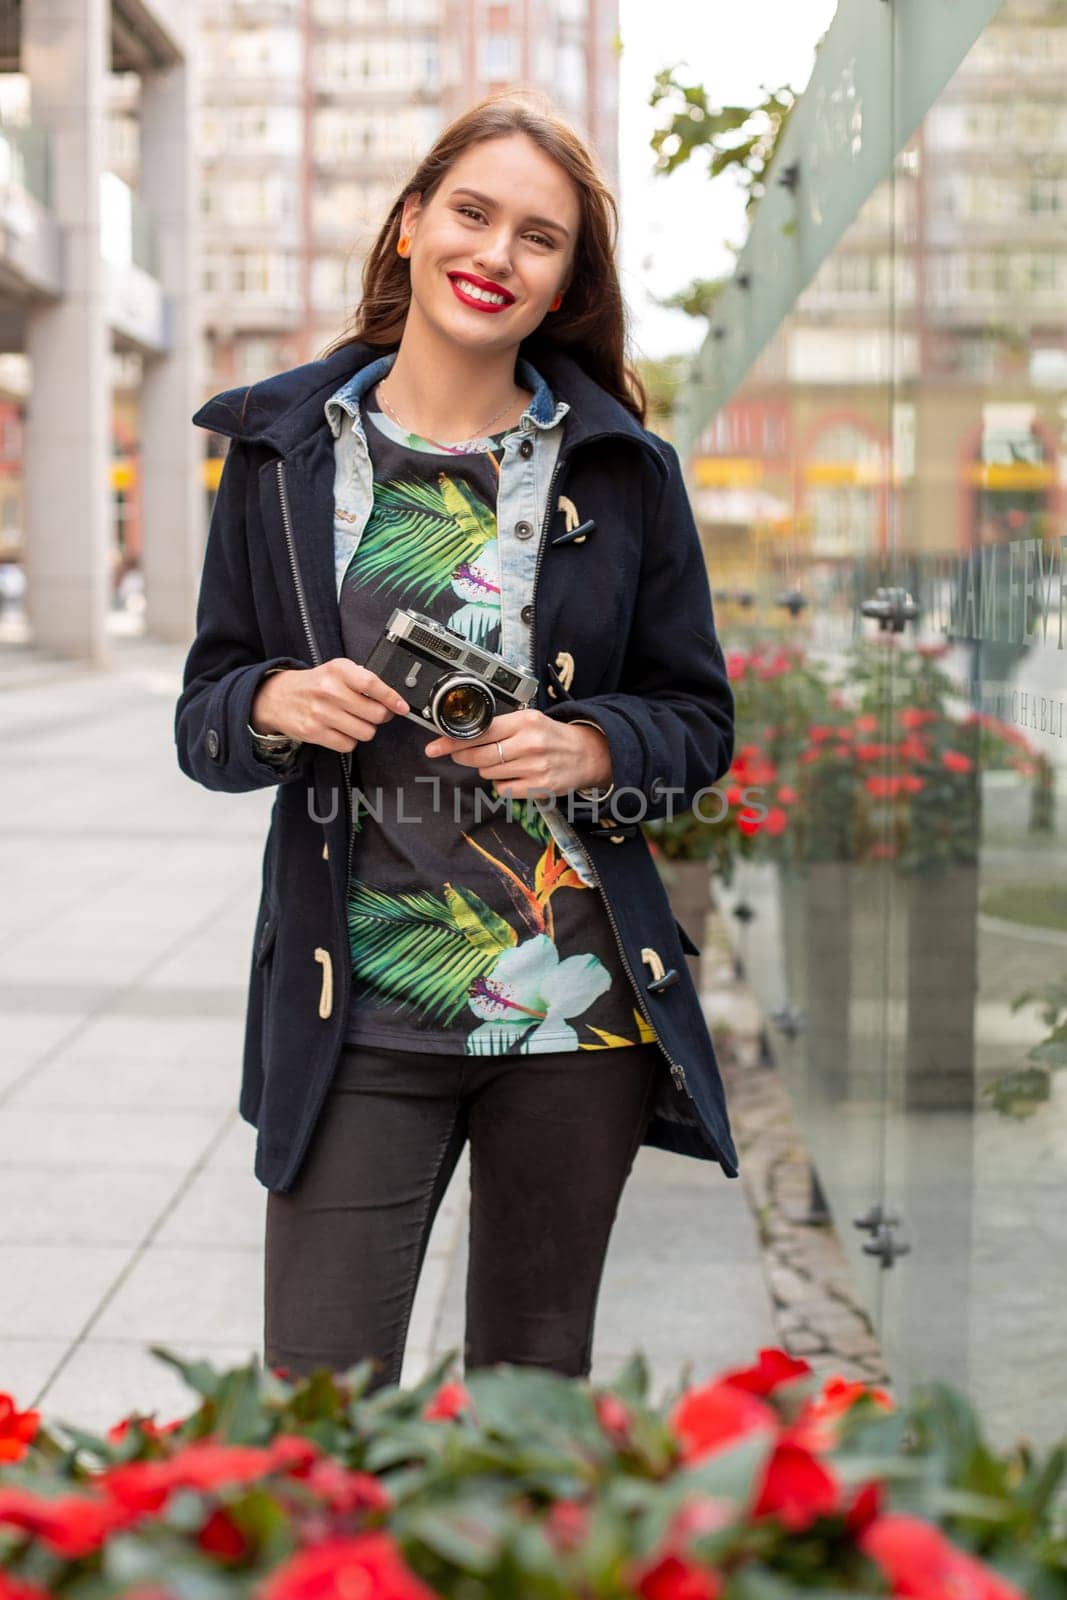 Outdoor autumn smiling lifestyle portrait of pretty young woman, having fun in the city with camera, travel photo of photographer. Making pictures in hipster style.